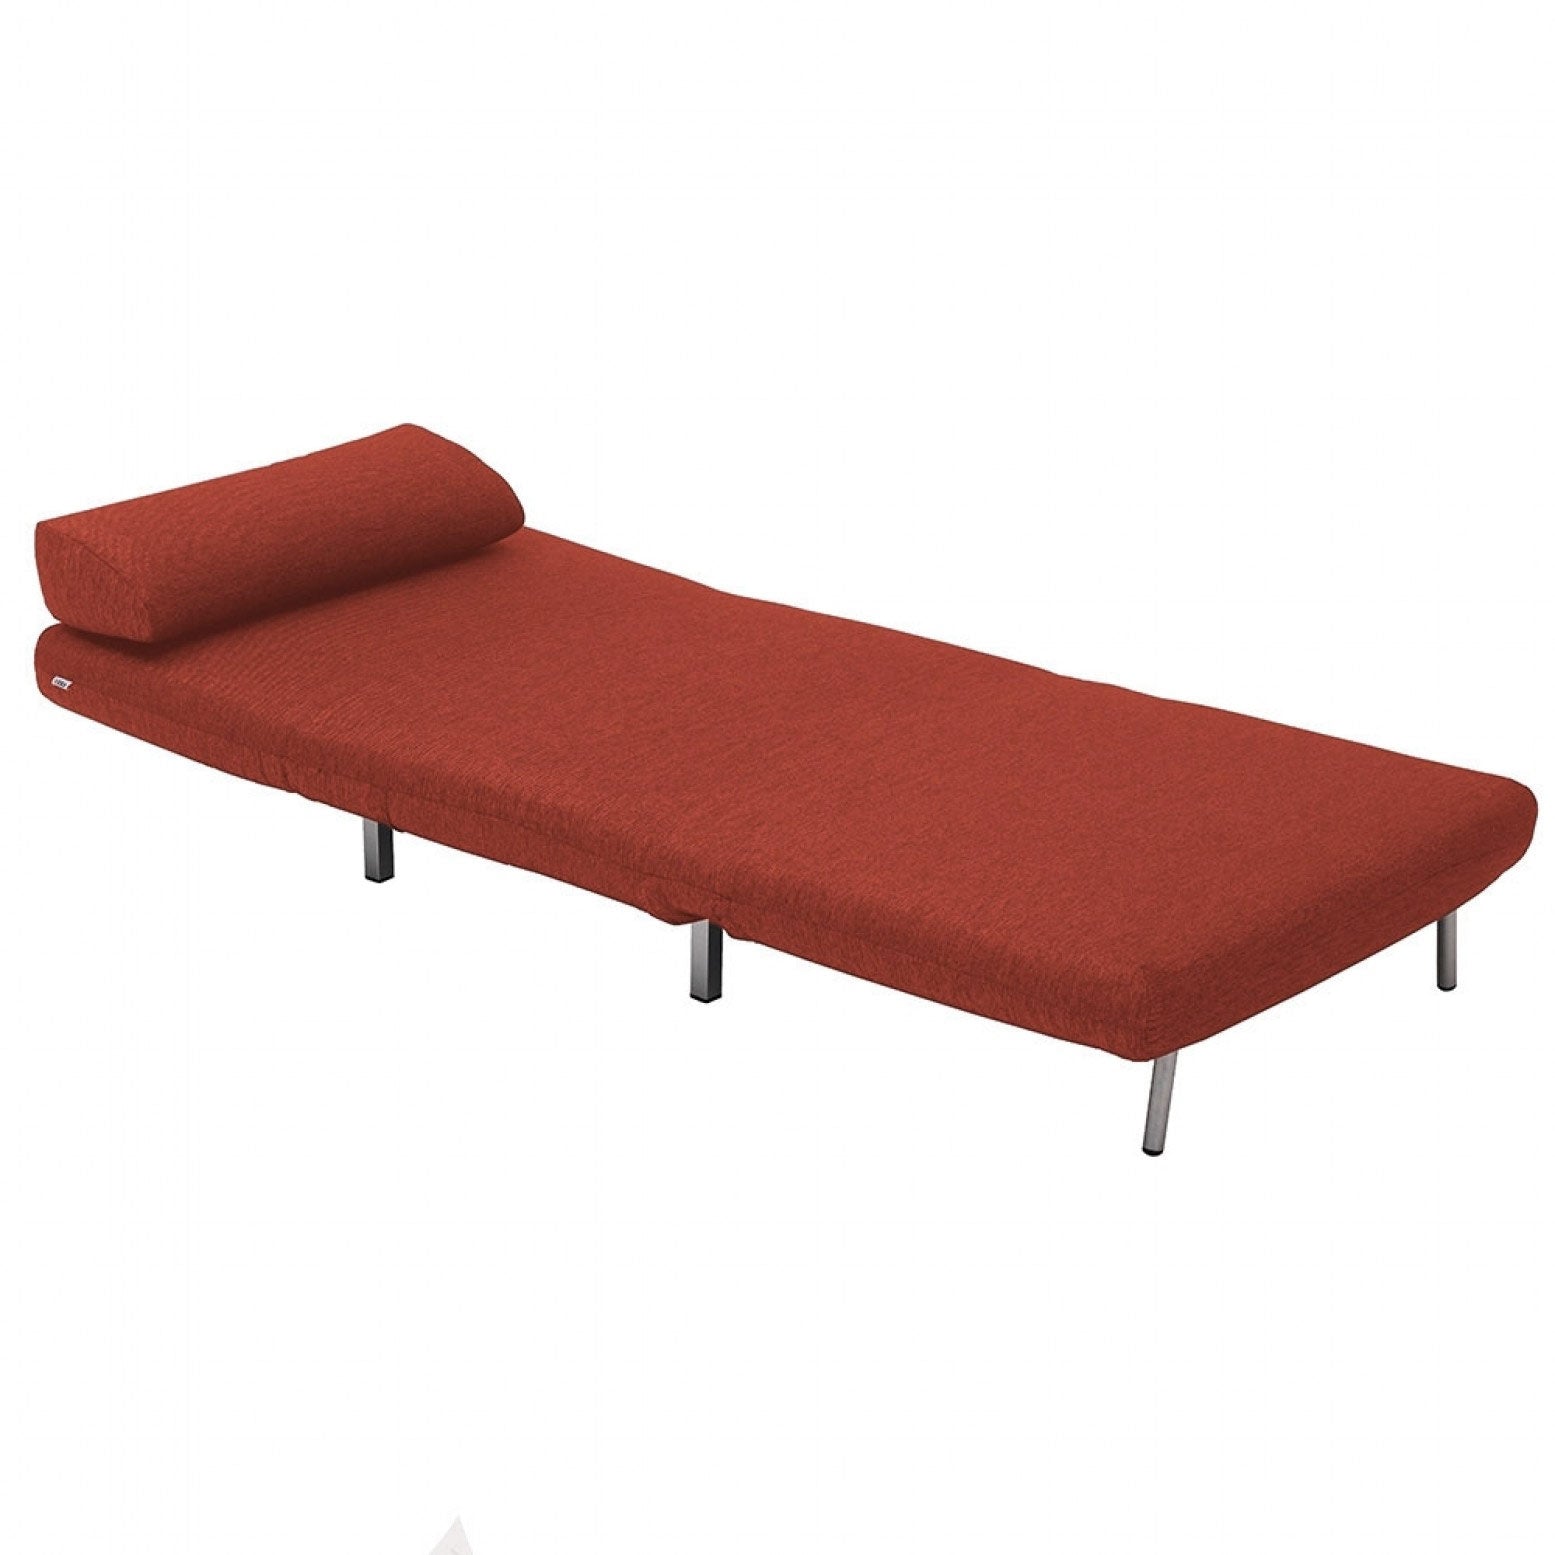 LK06-1 Sofa Bed in Red